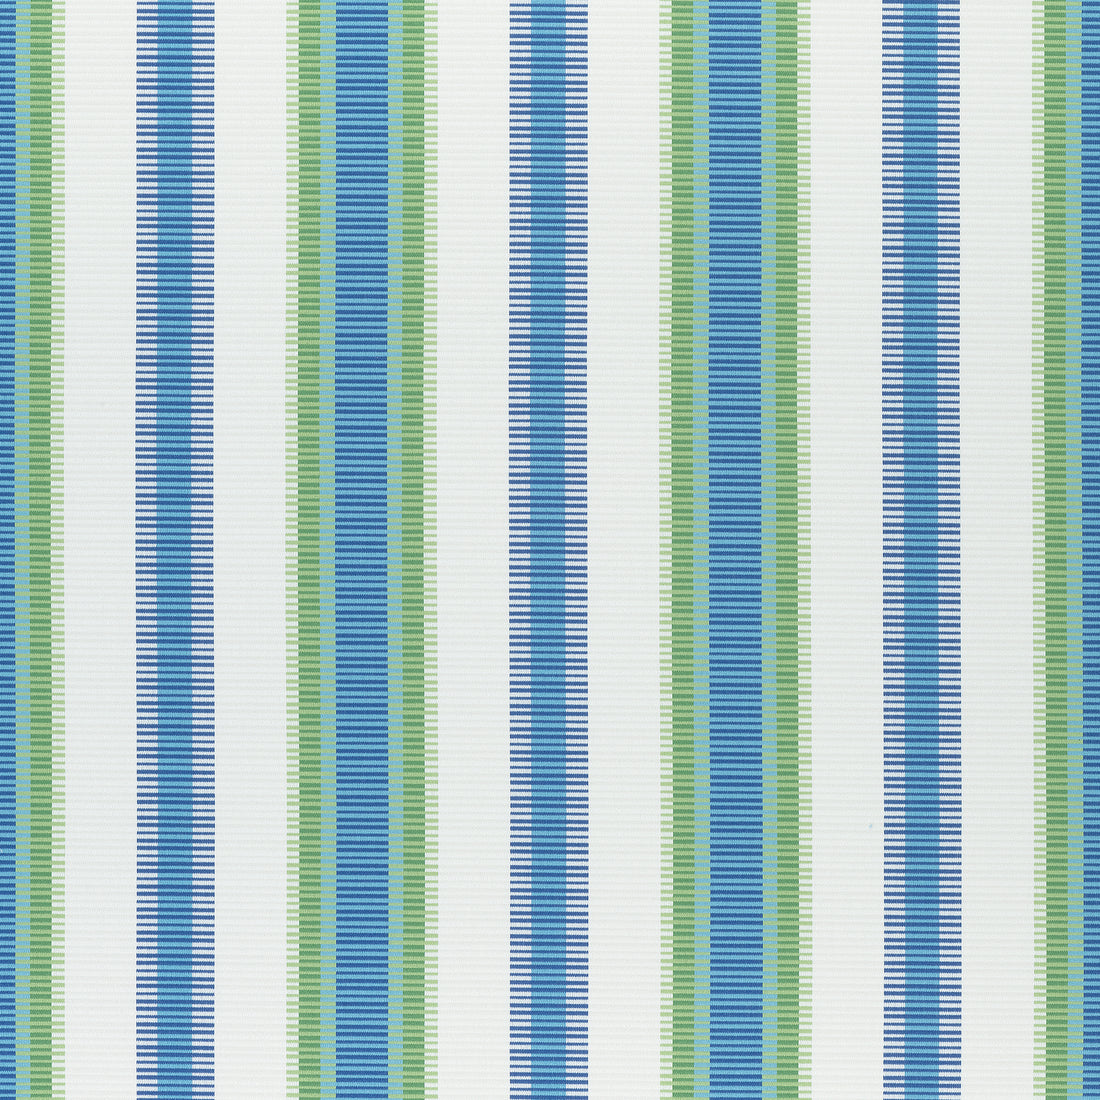 Samba Stripe fabric in royal blue and green color - pattern number W74670 - by Thibaut in the Festival collection